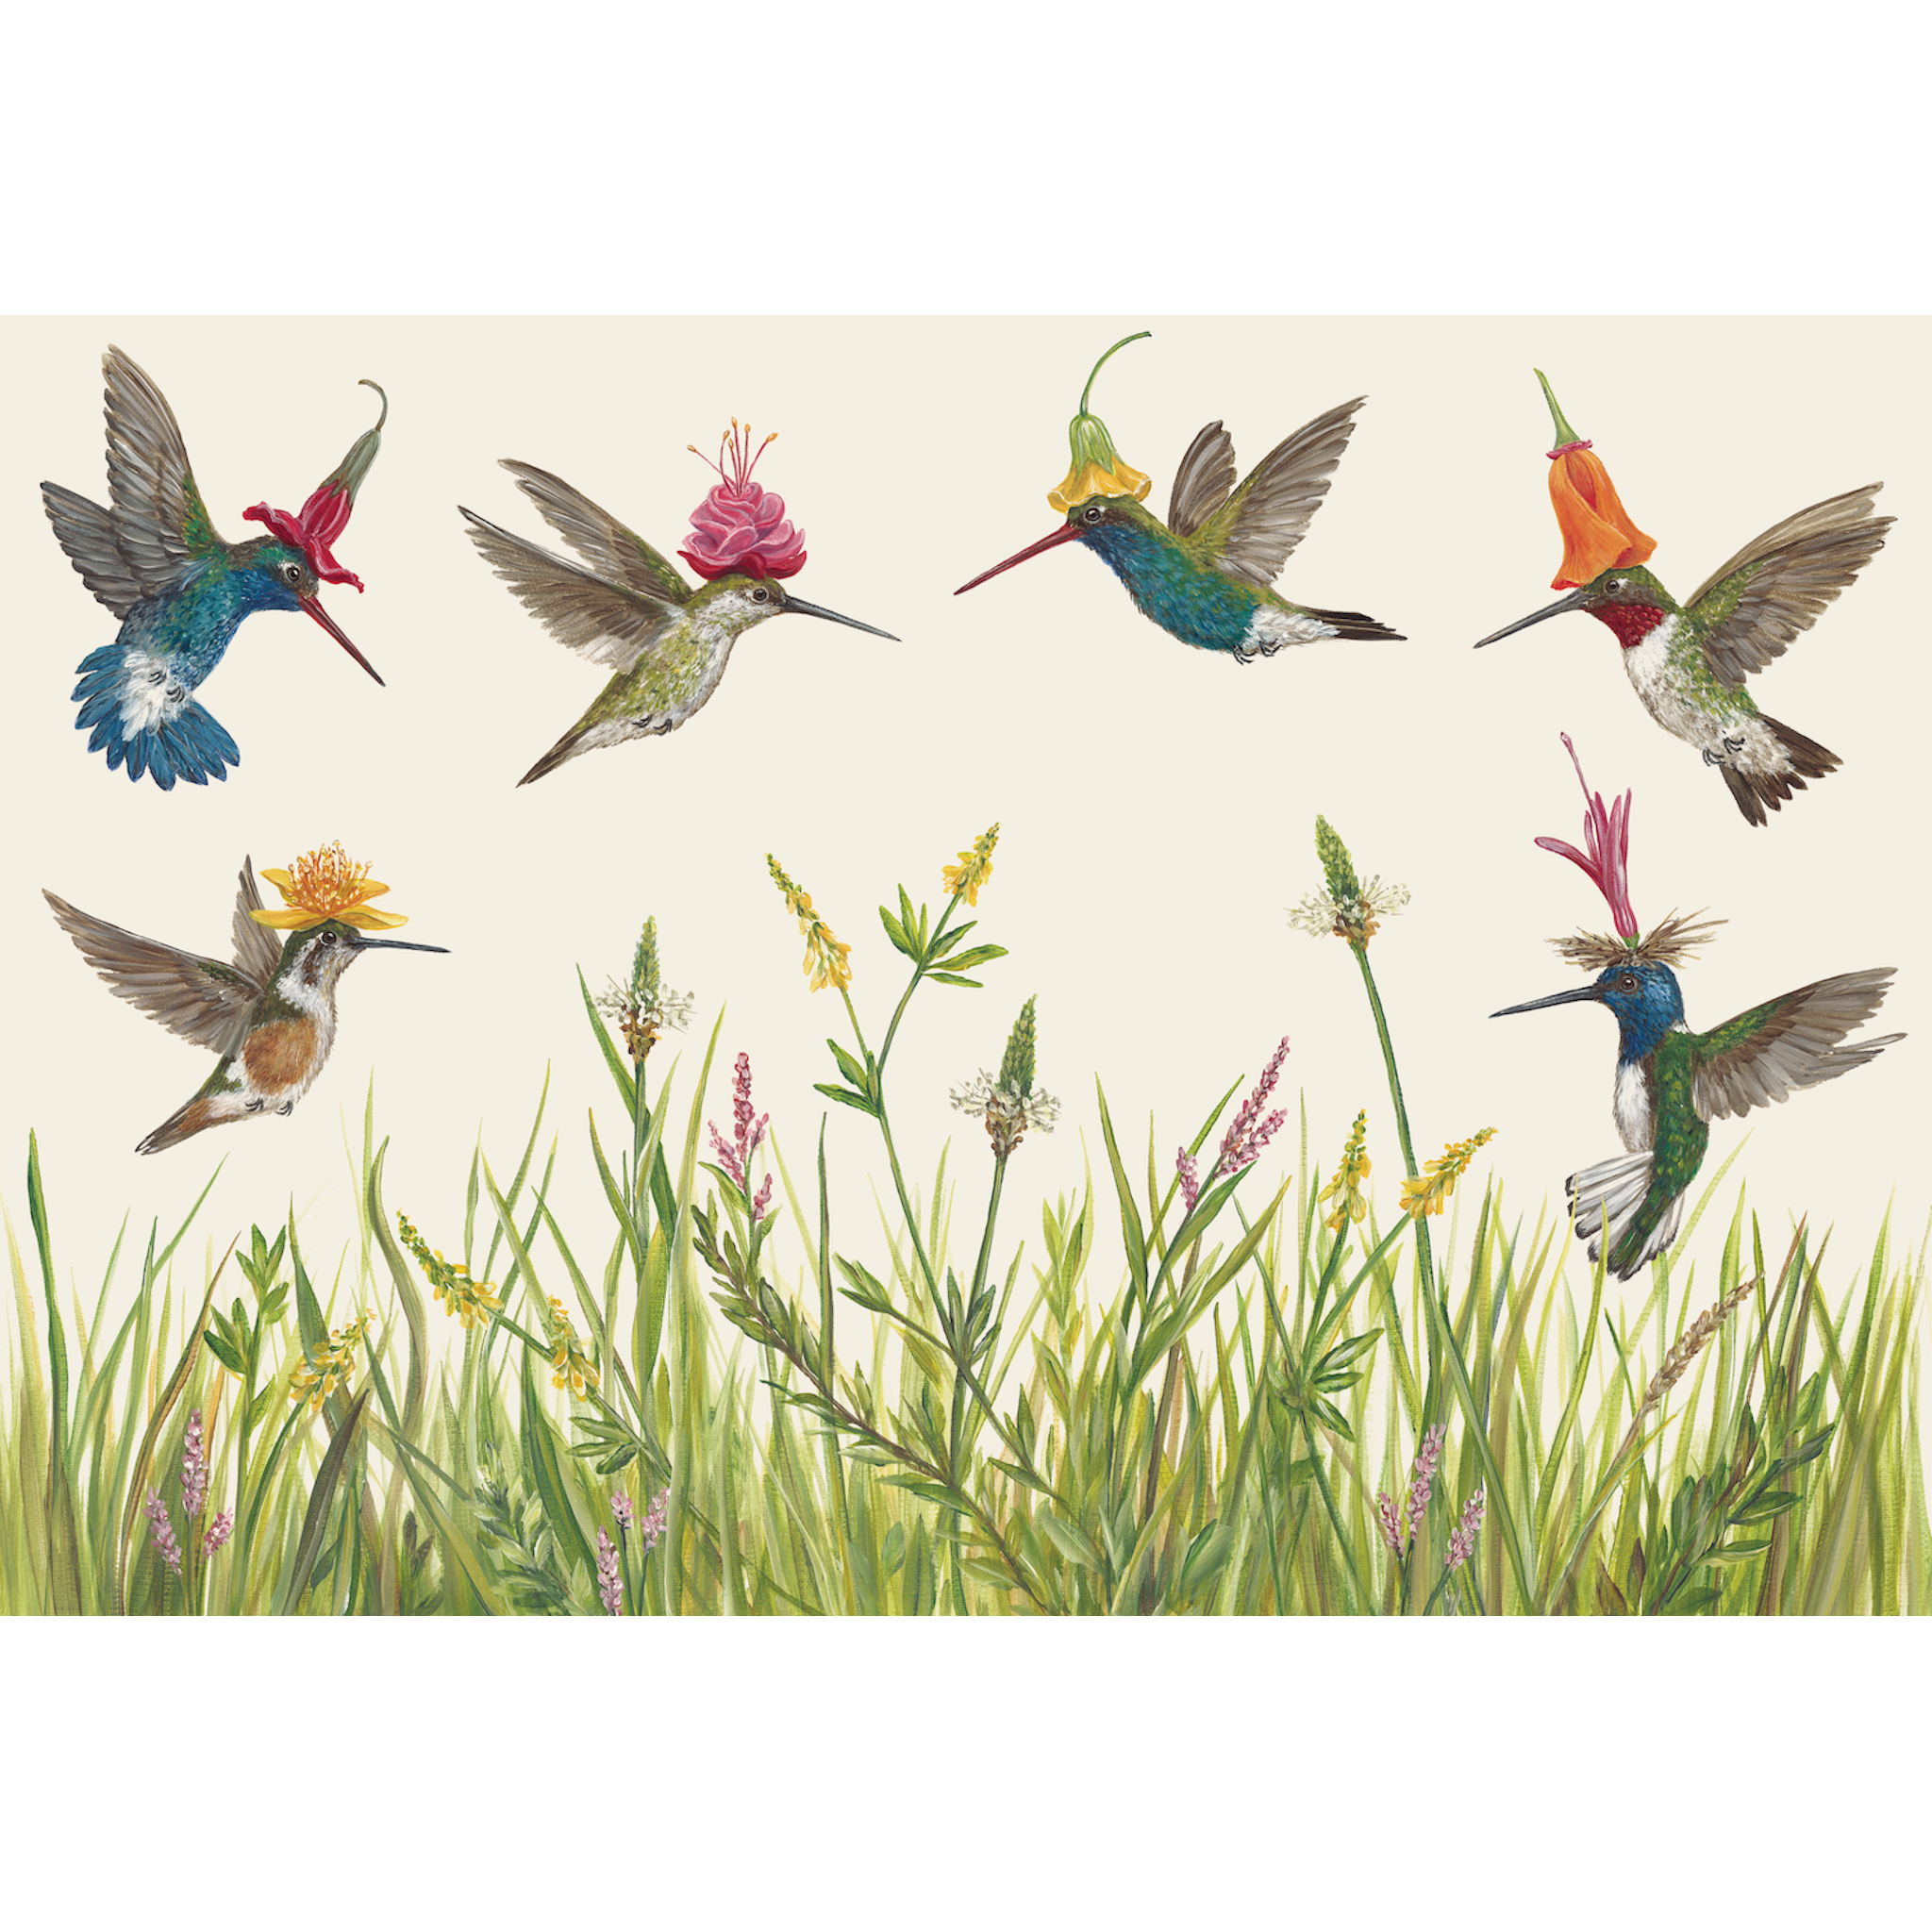 A whimsical illustration of six vibrant hummingbirds, each wearing a flower as a hat, fluttering over a green grassy field with wildflowers, on a white background. 